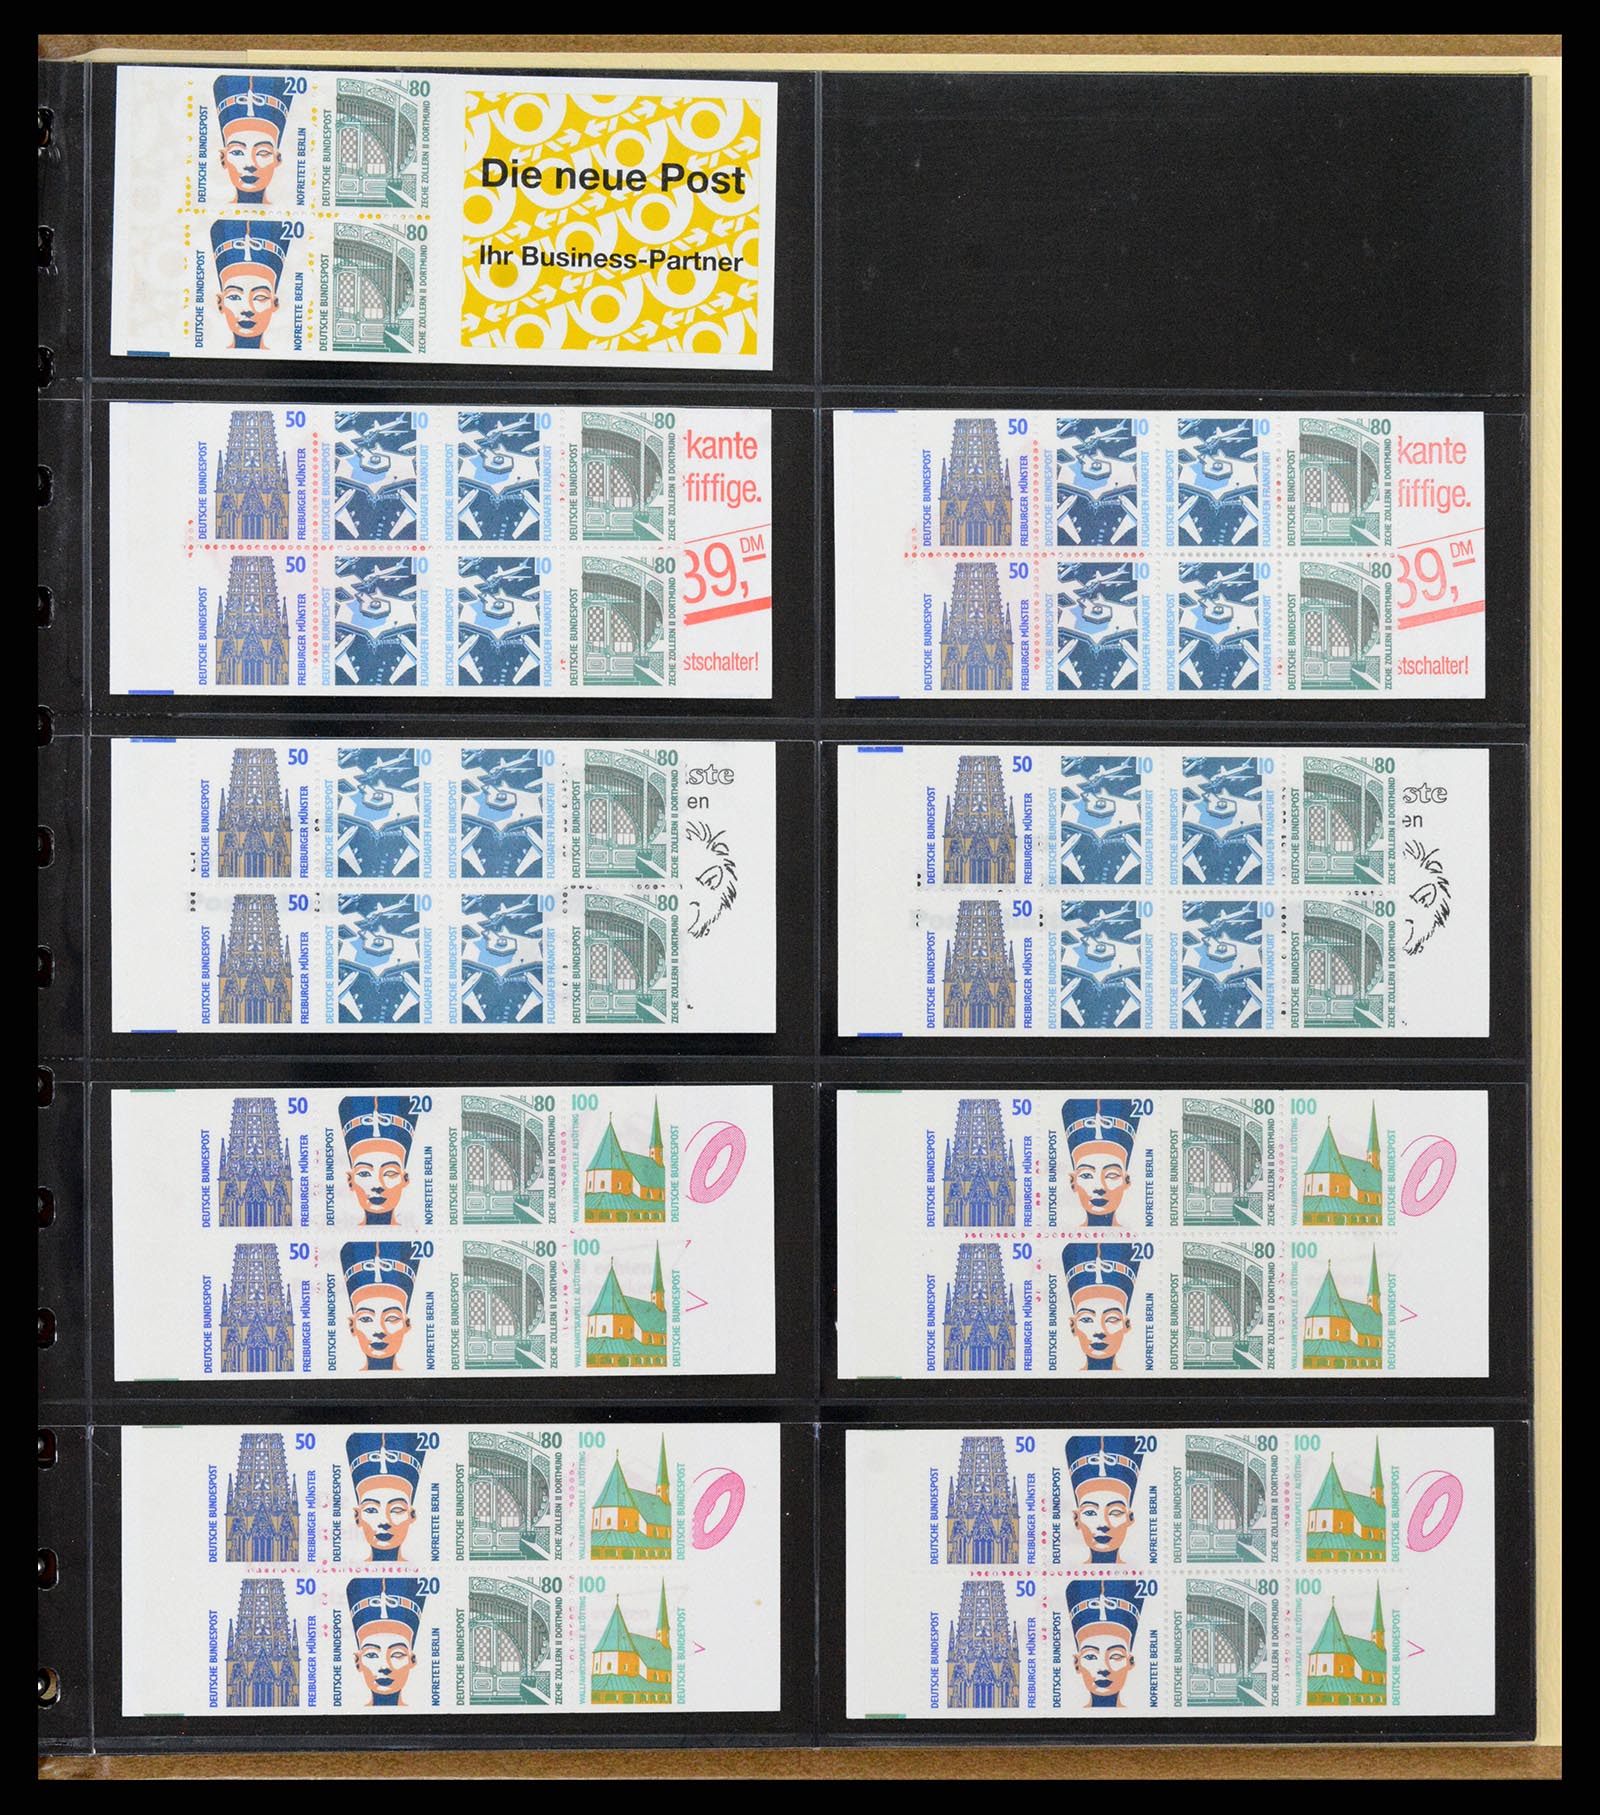 37365 062 - Stamp collection 37365 Bundespost stamp booklets 1951-2001.